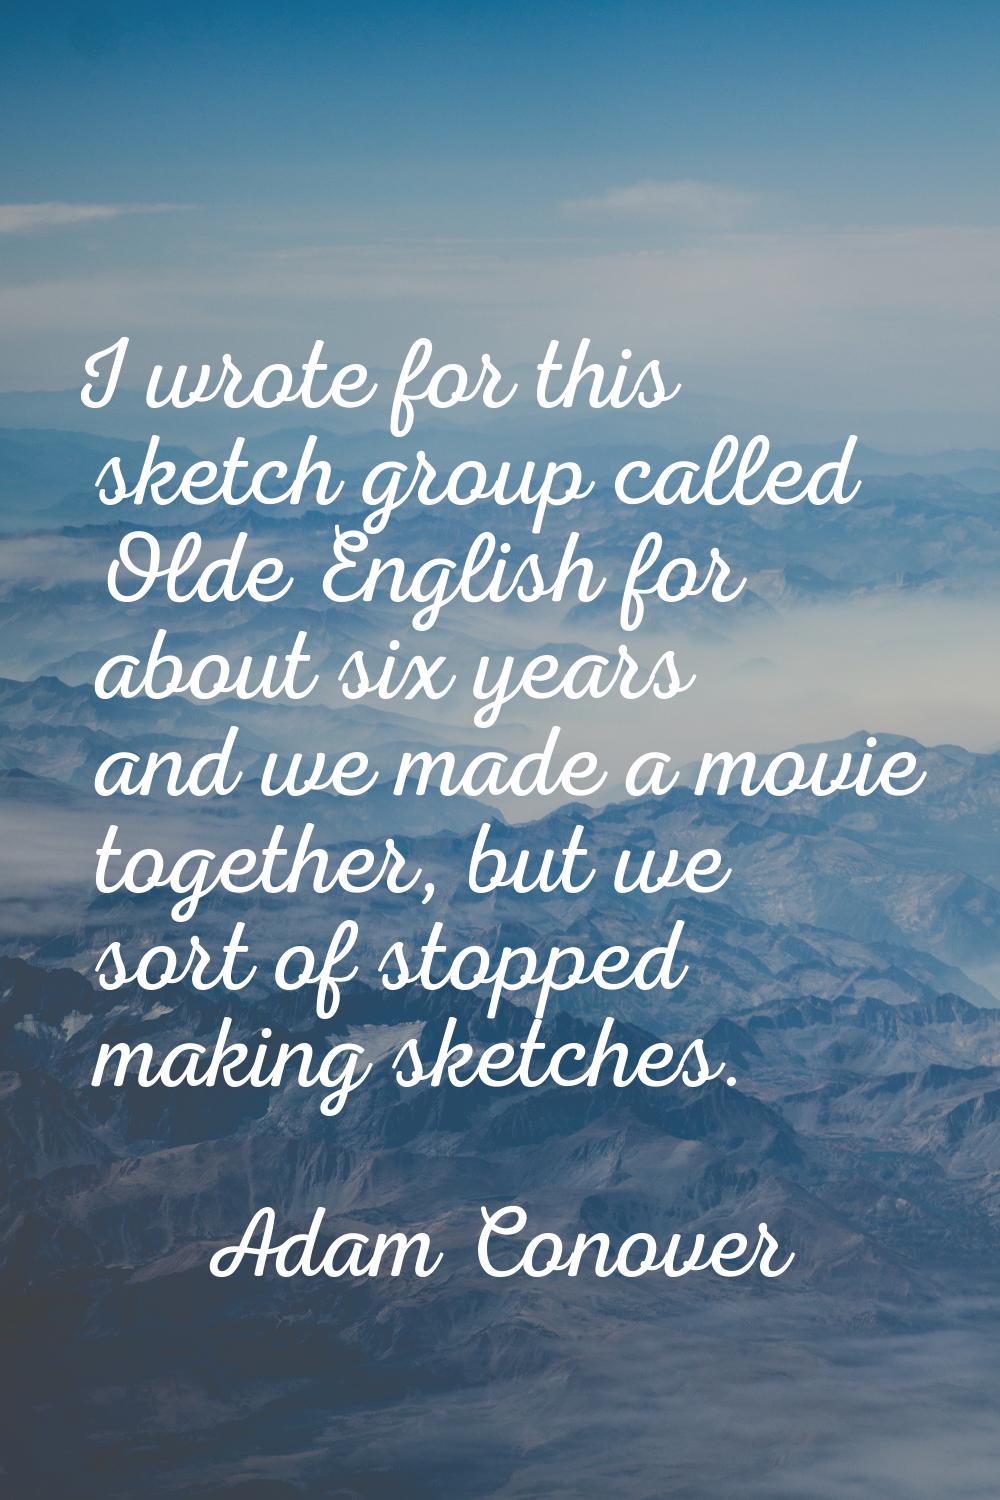 I wrote for this sketch group called Olde English for about six years and we made a movie together,